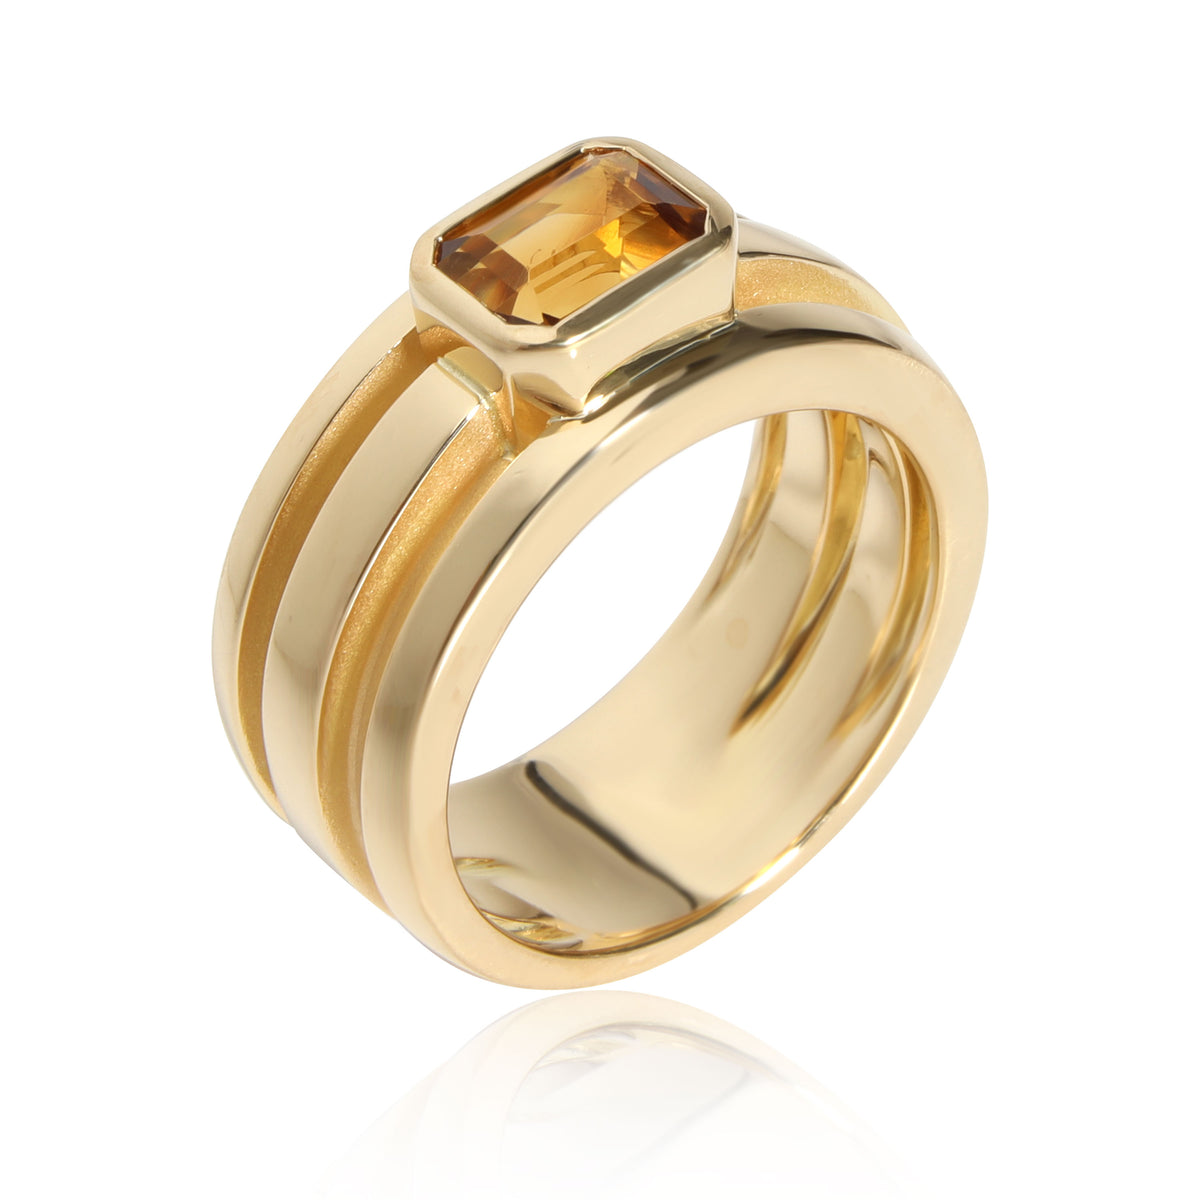 Tiffany & Co. 1990's Citrine Ring in 18K Yellow Gold